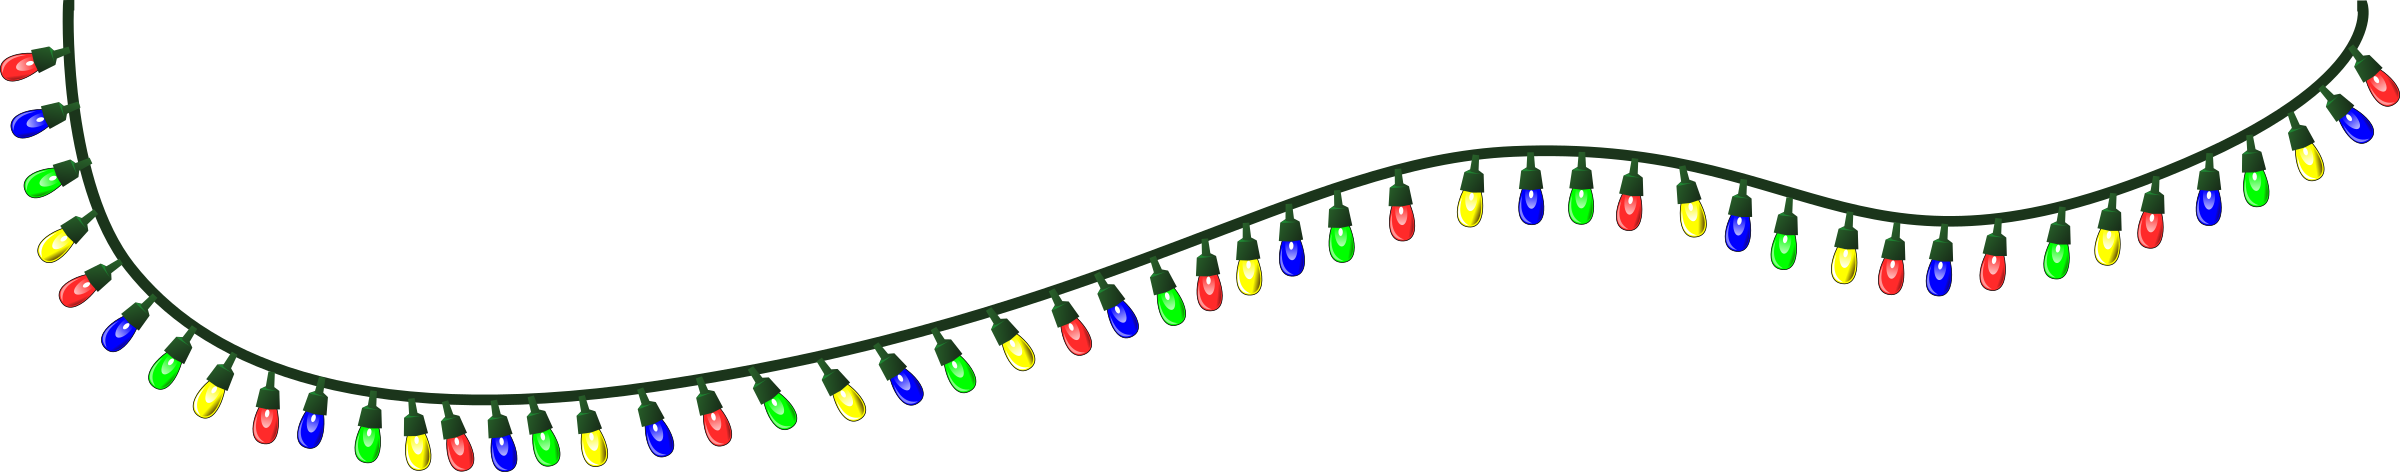  beauty transparent christmas. Lights clipart gold string